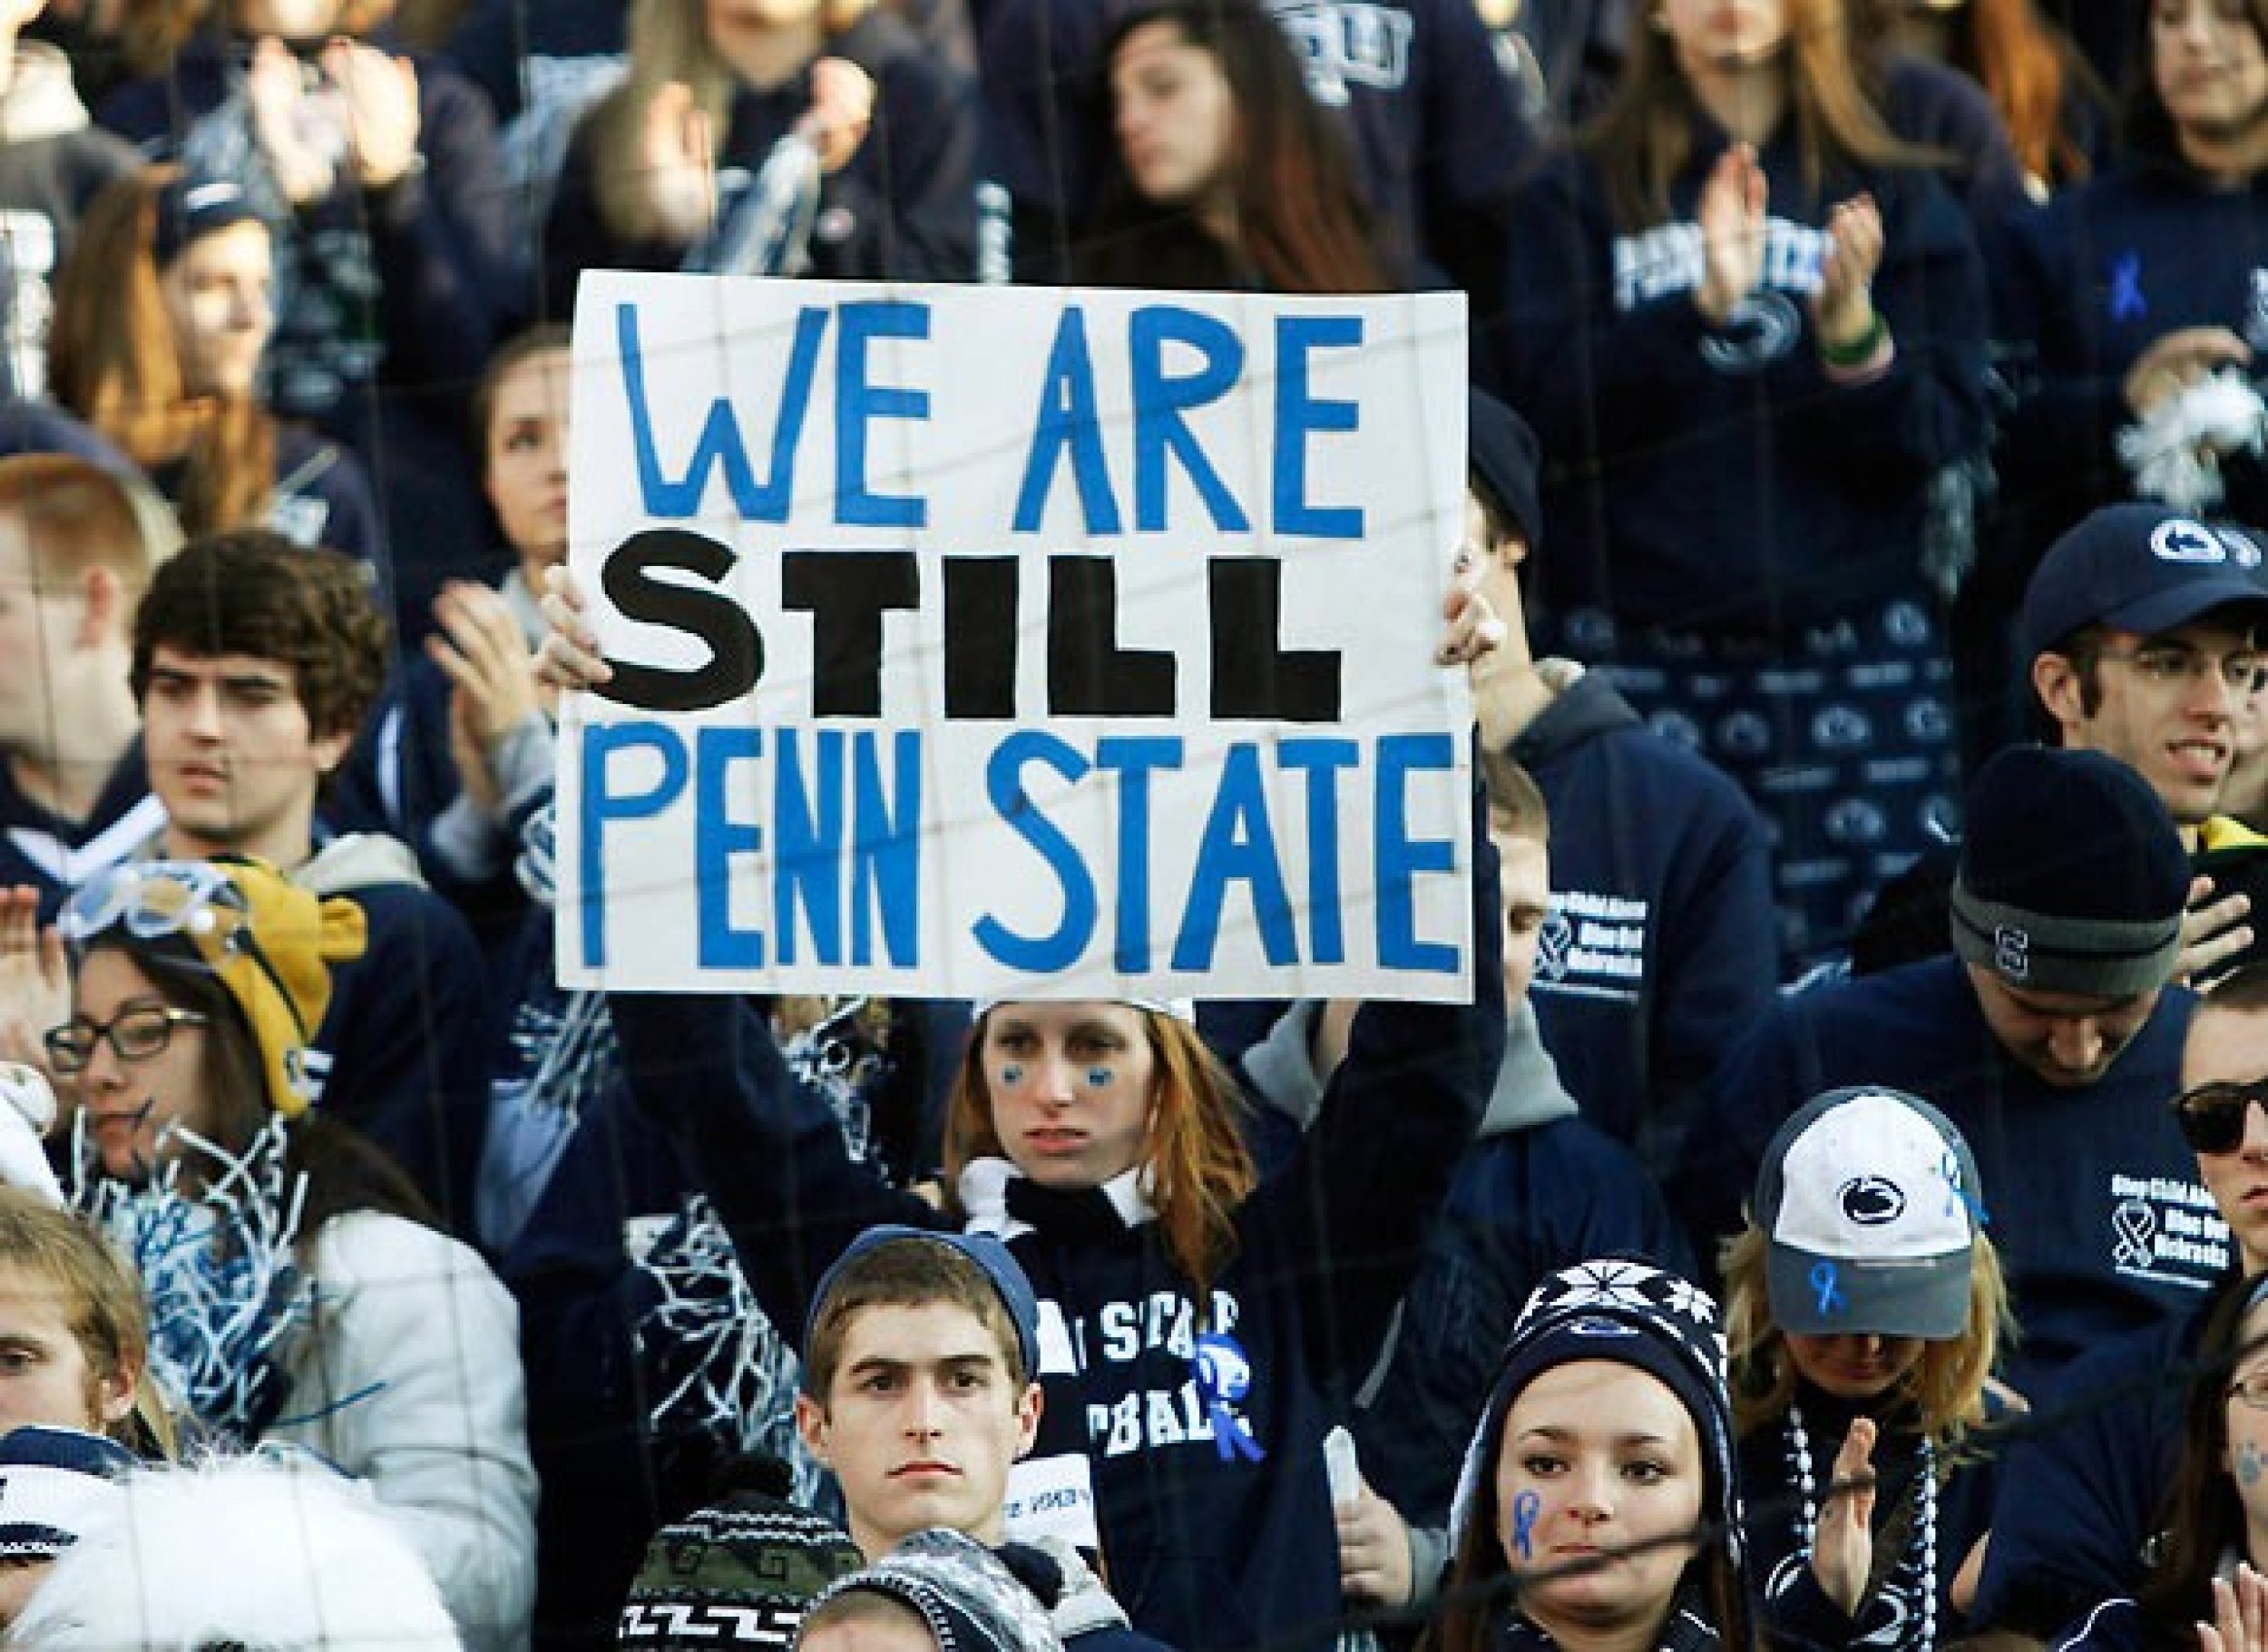 Penn State Updates Its Uniforms In Support of Child Abuse Victims IBTimes